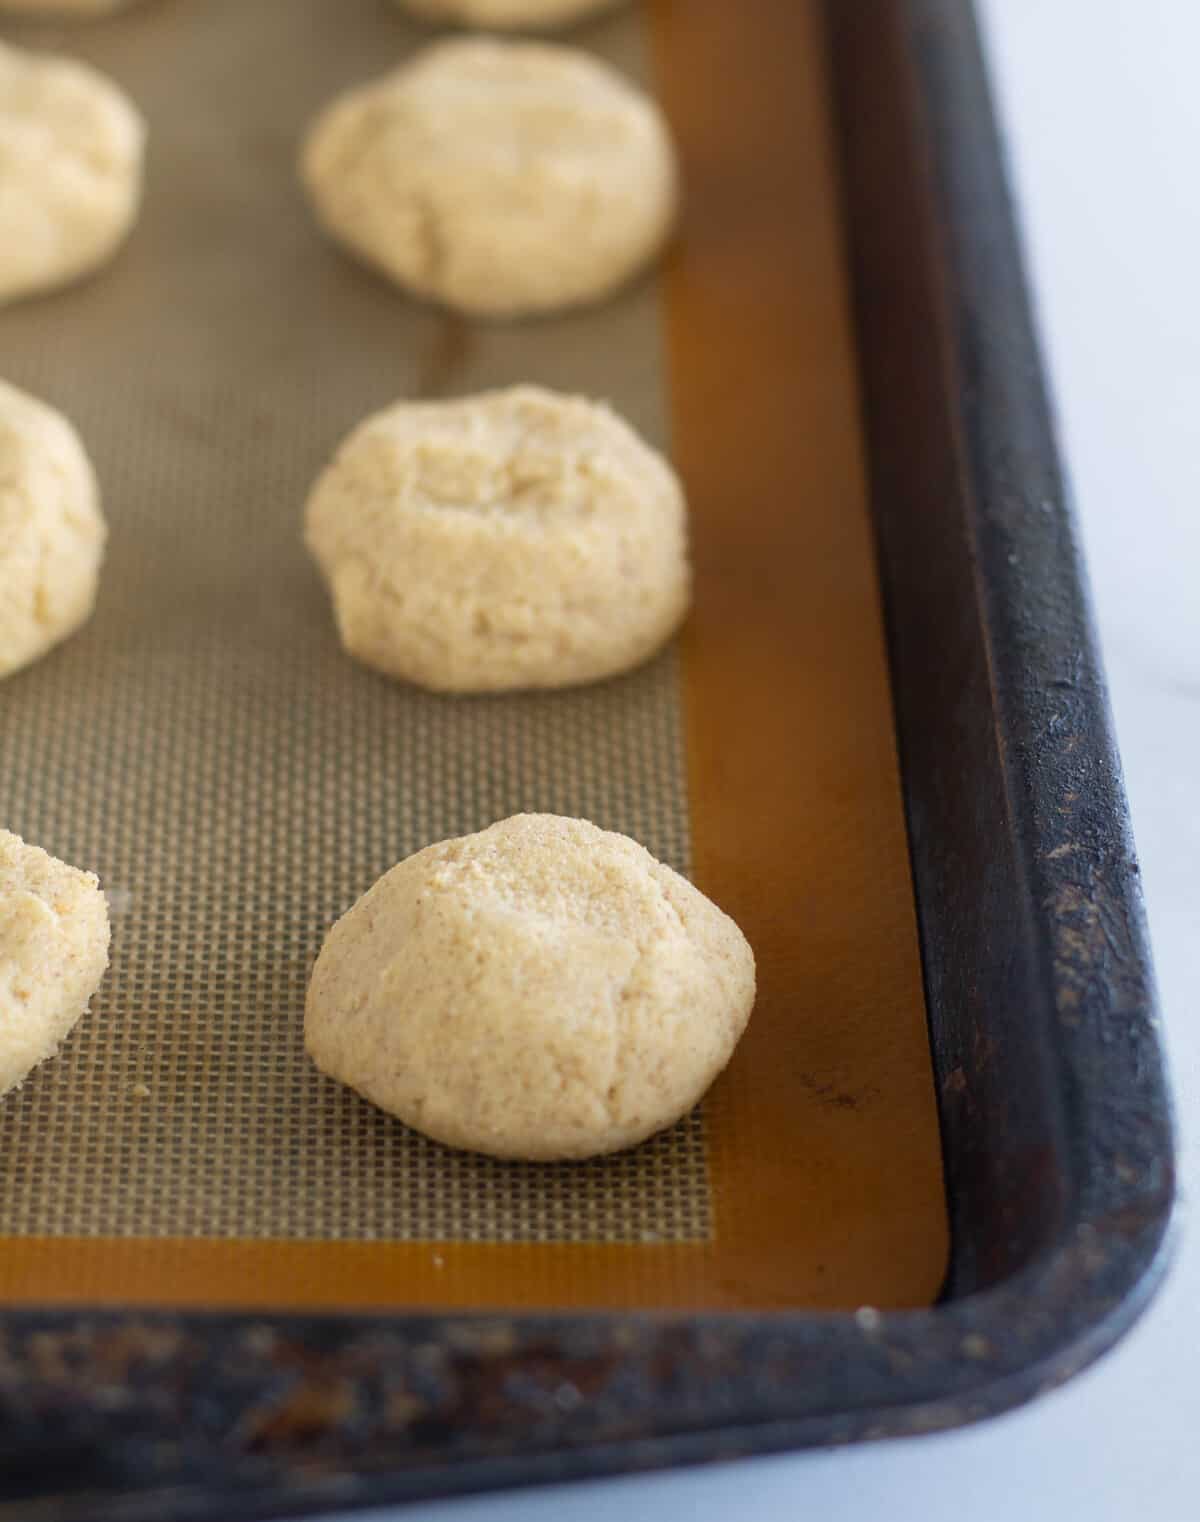 unbaked cookies on lined baking sheet.